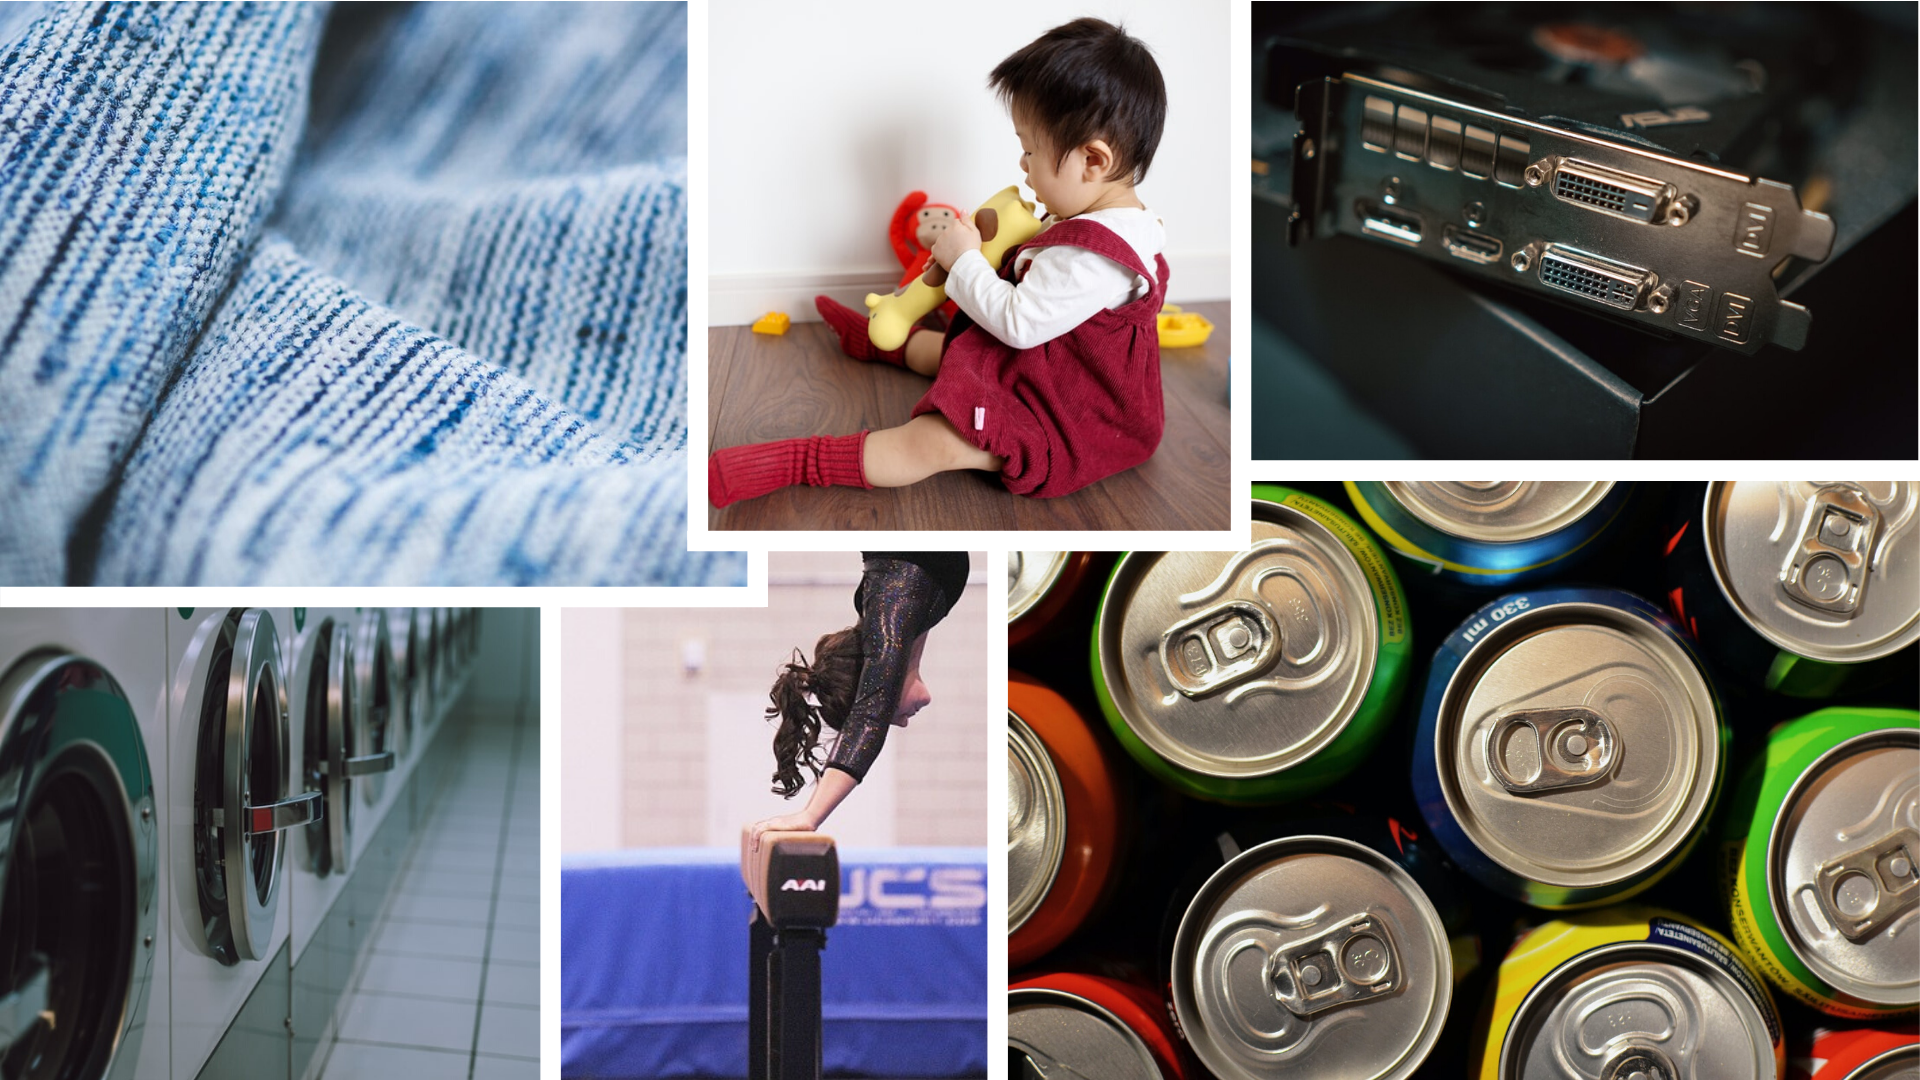 Collage of photos illustrating the types of products included in the report.